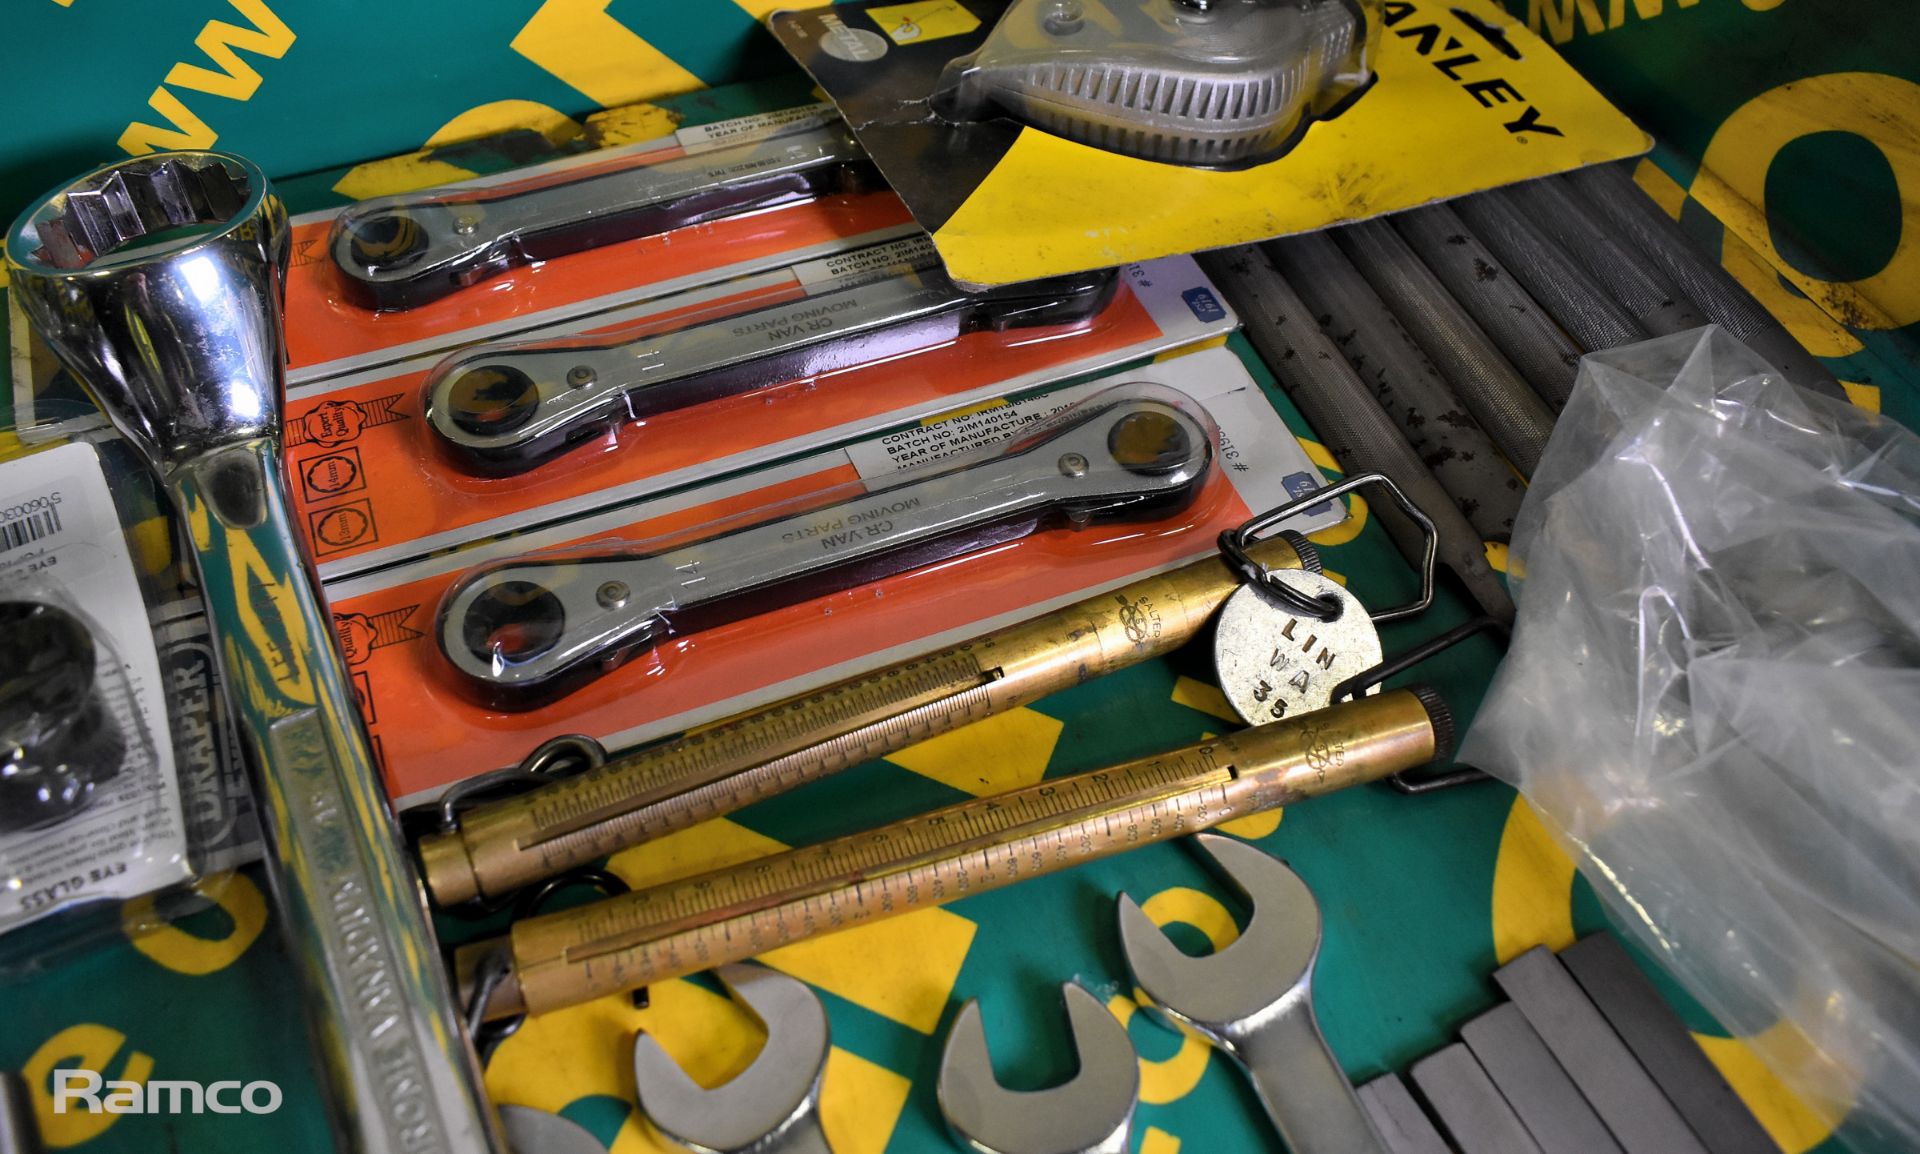 Hand tools - screwdrivers, hand files, sockets, wrenches, punches, solder reel & more - Image 6 of 9